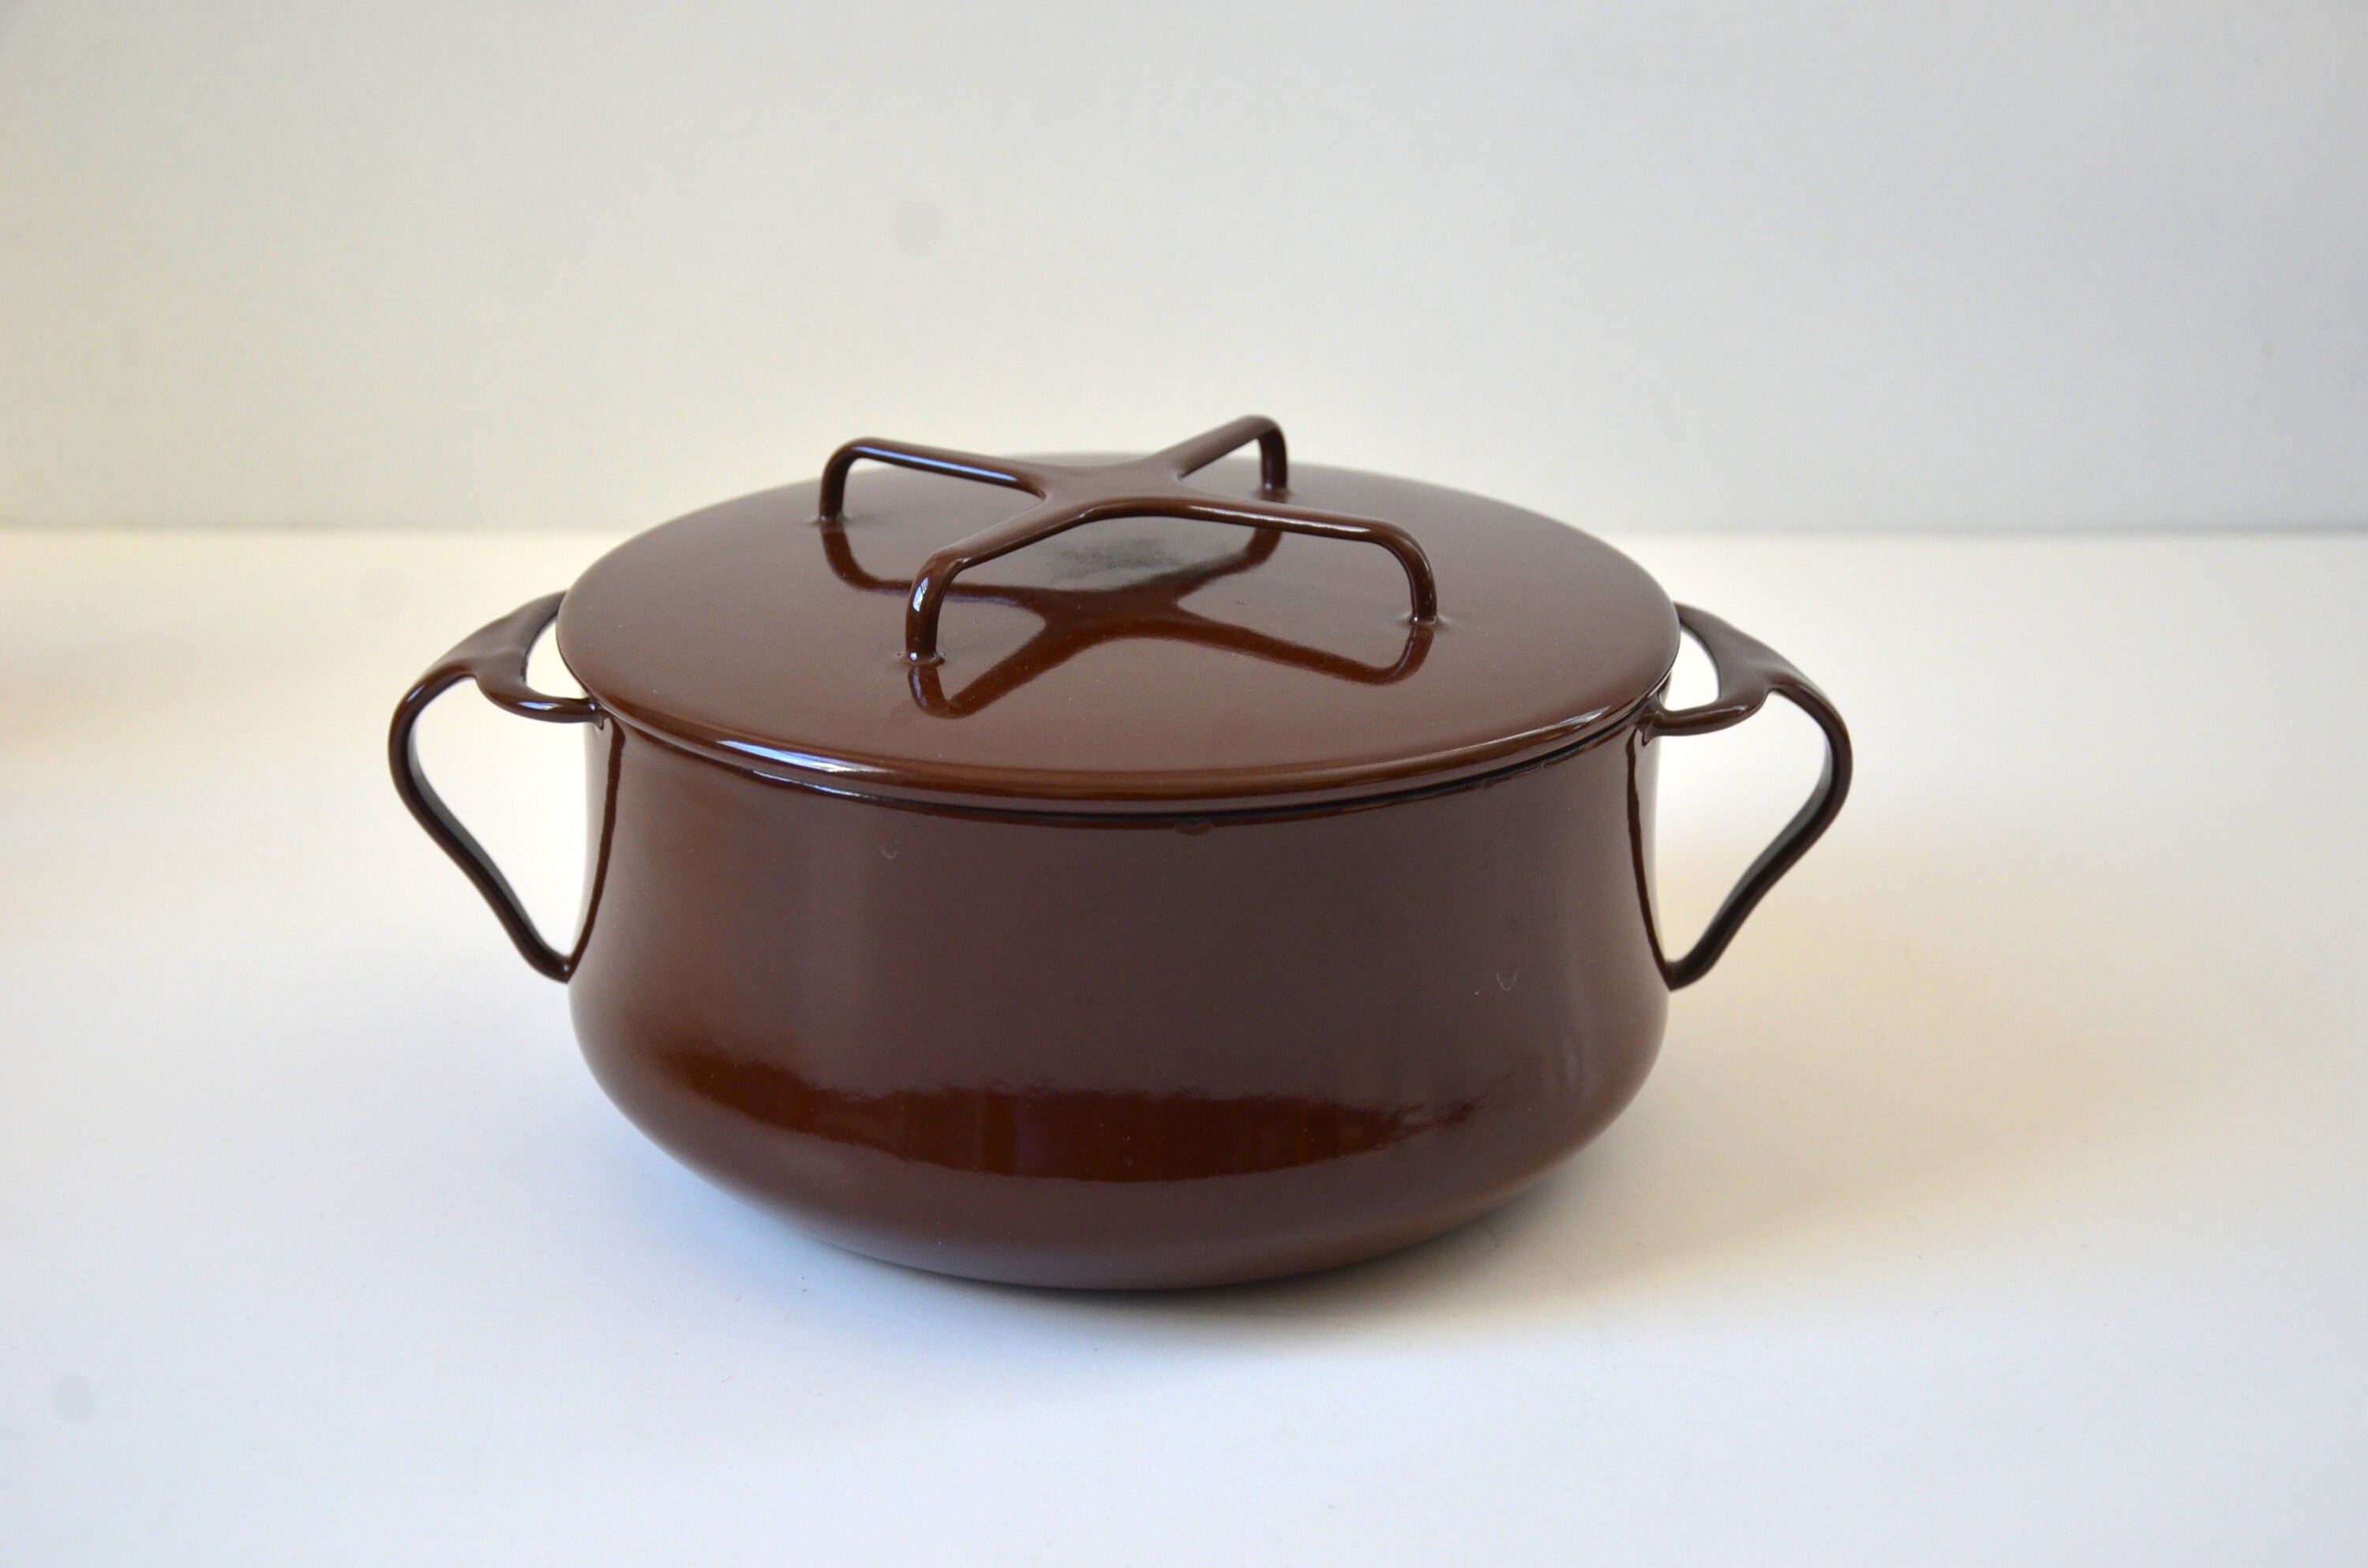 Dansk Jhq Copper 7 qt Stock Pot with Lid in Brown